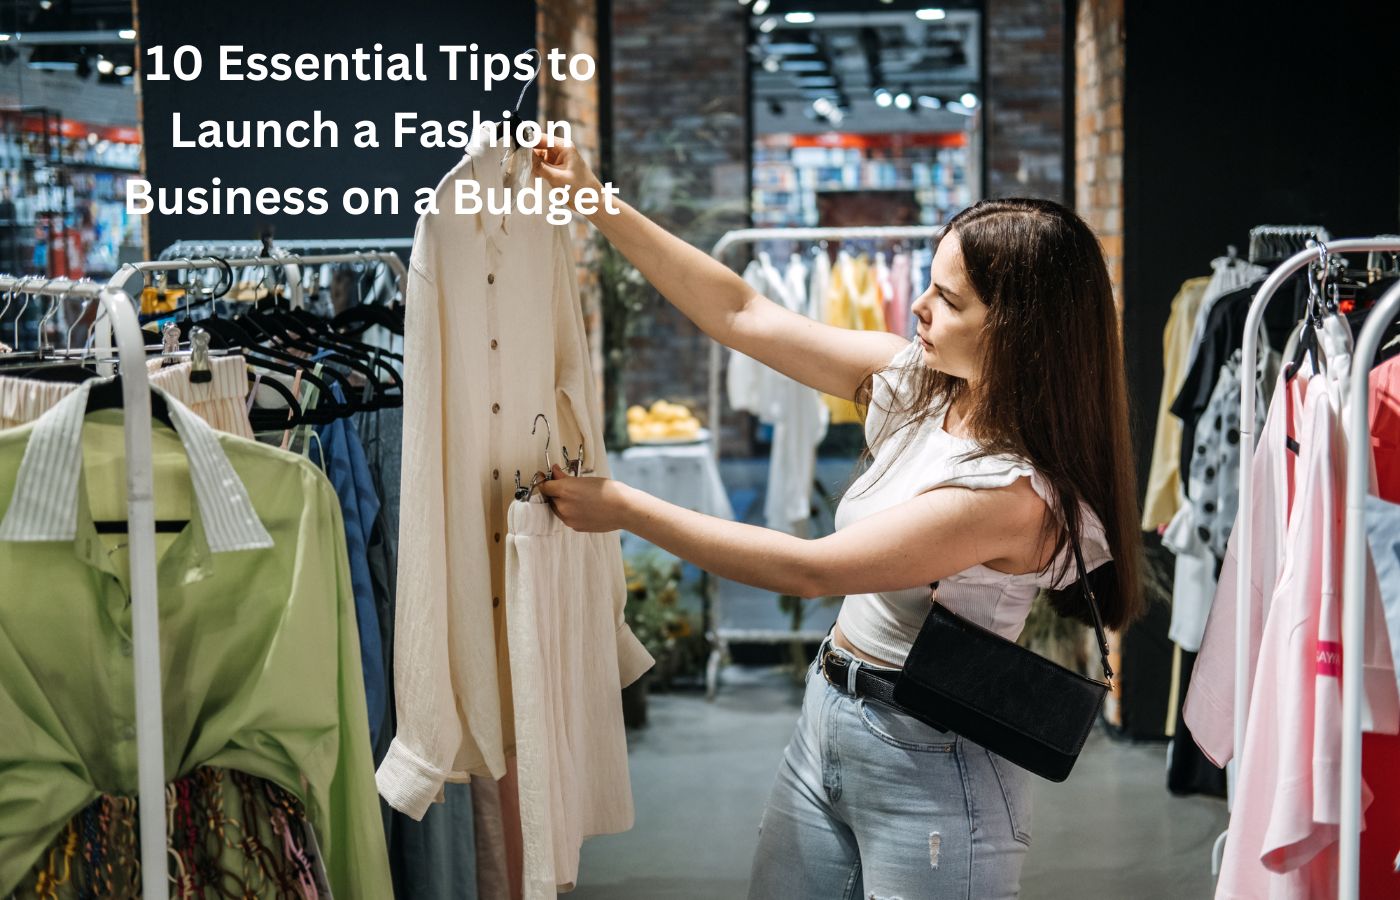 Essential Tips to Launch a Fashion Business on a Budget